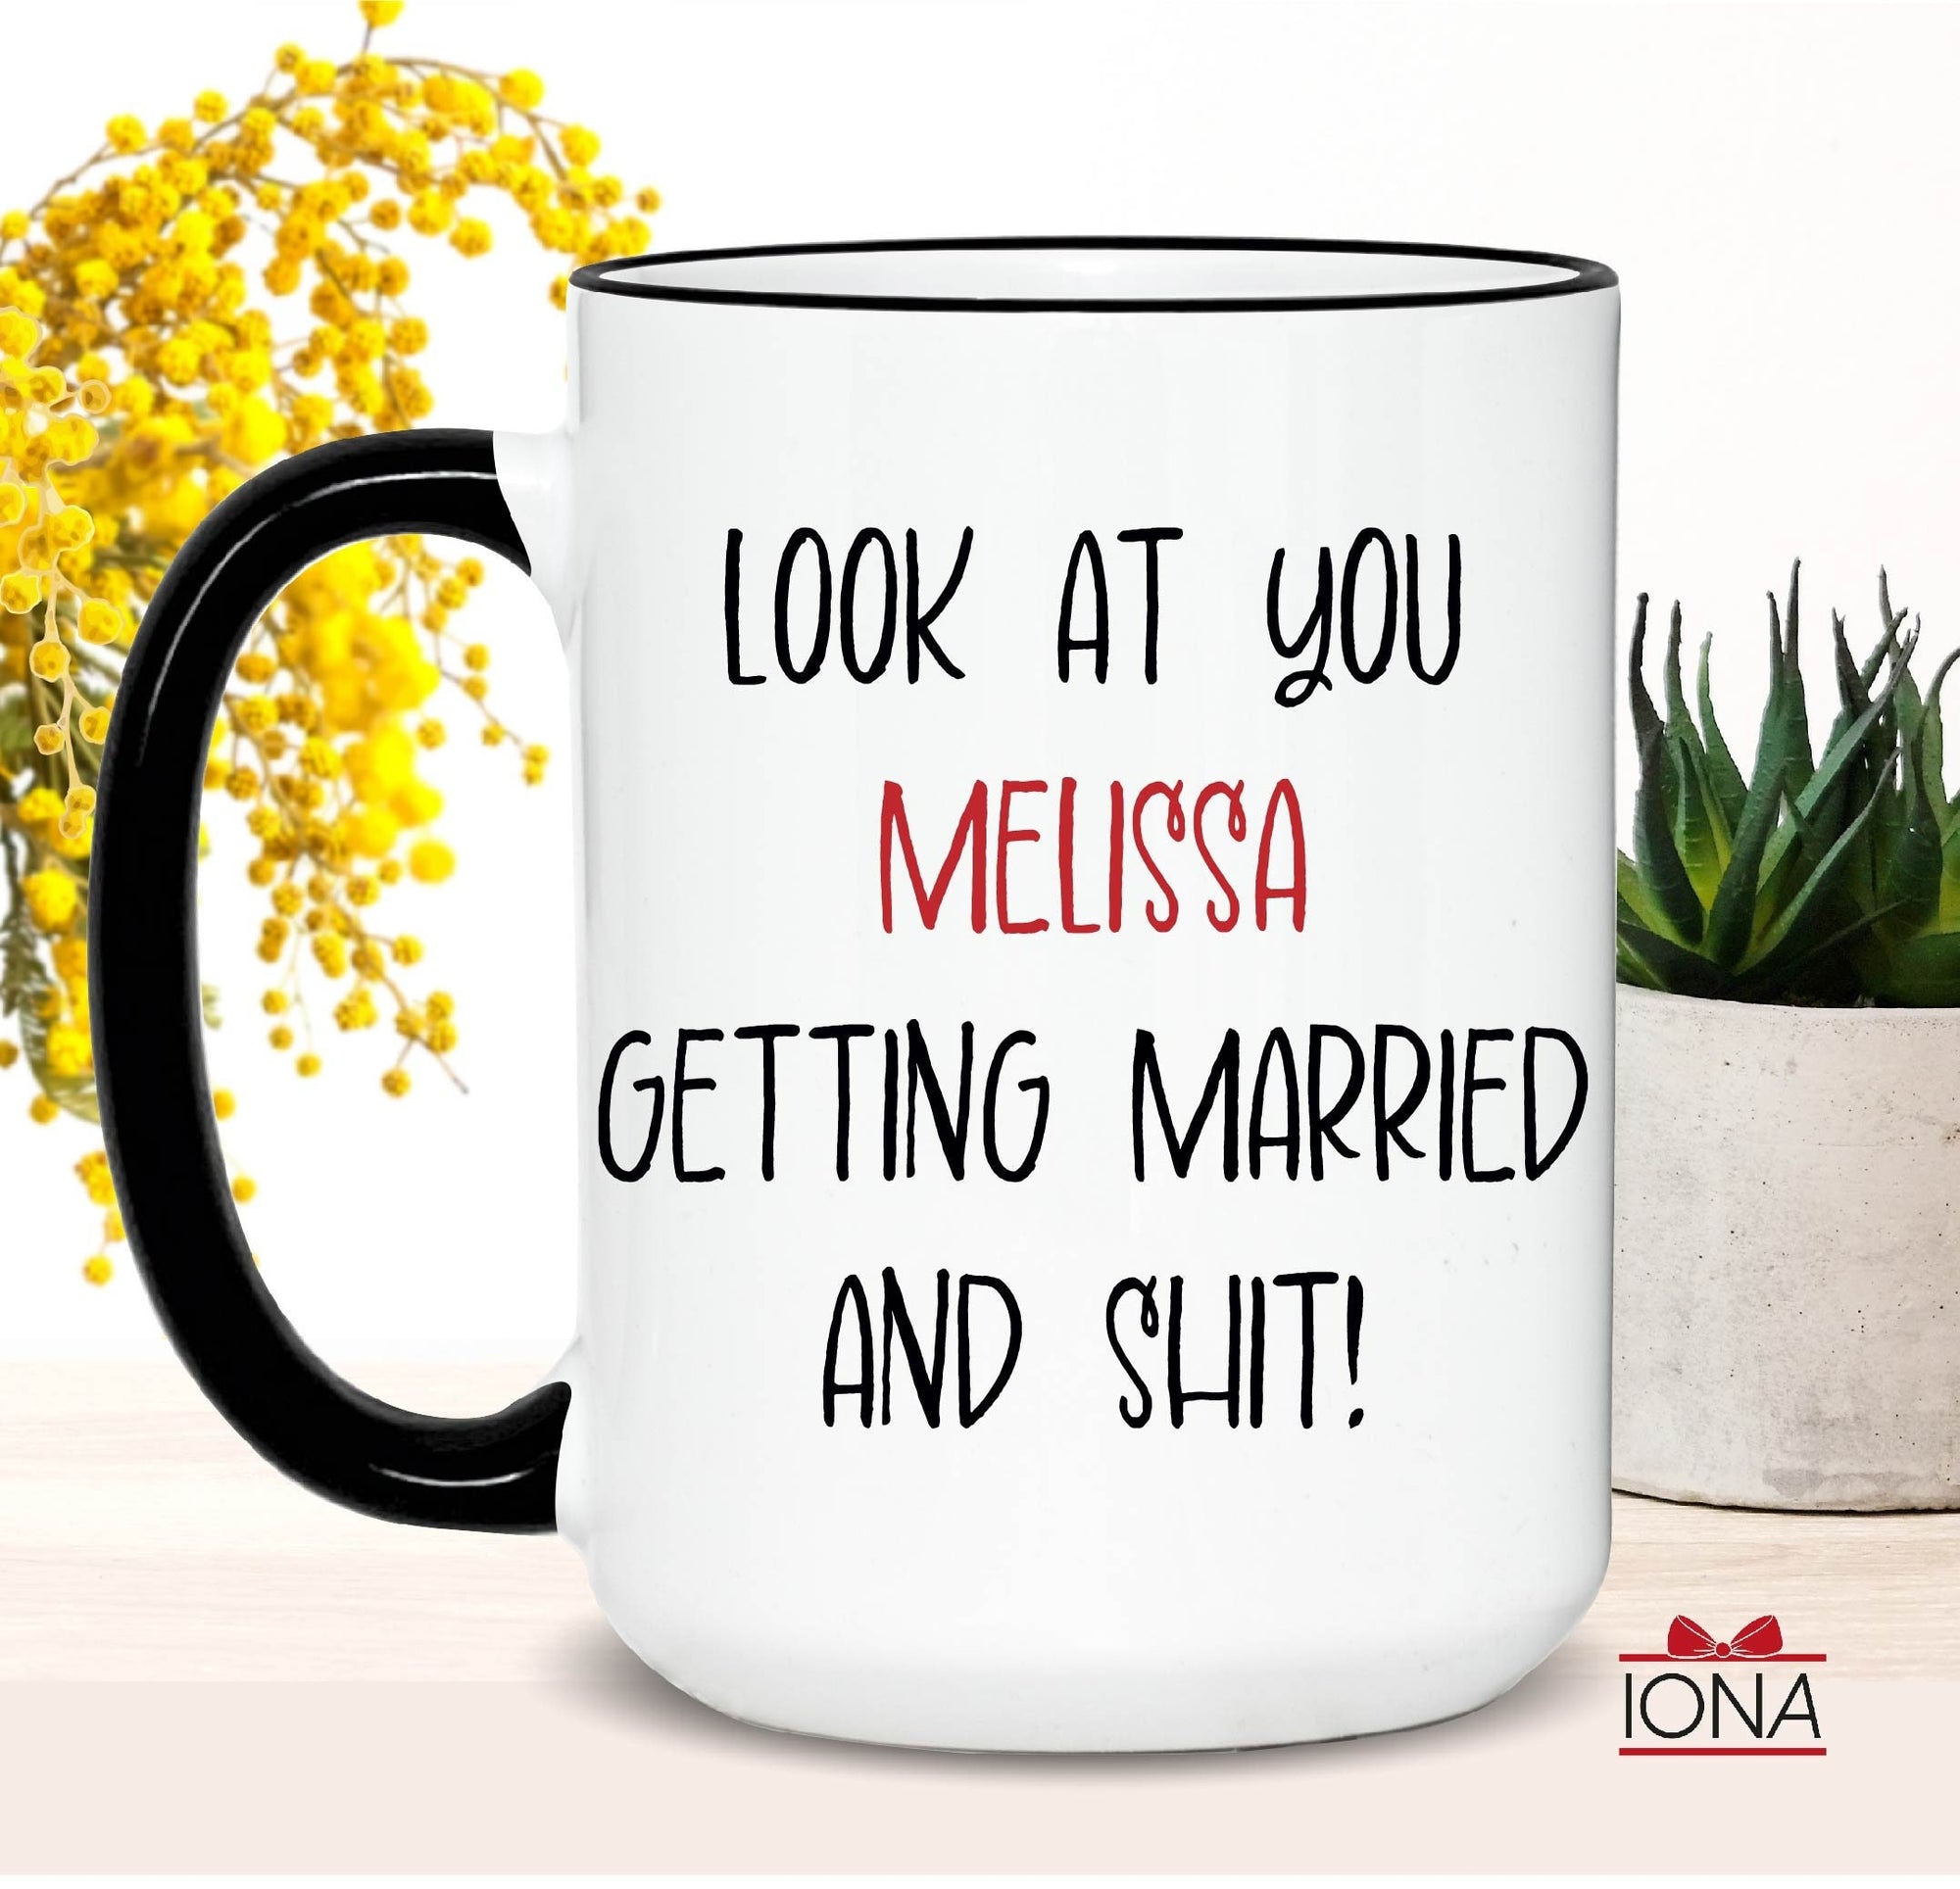 Look at you getting married Coffee Mug, Personalized Married Gift, bridal shower present, gift for bride, engagement, wedding best friend